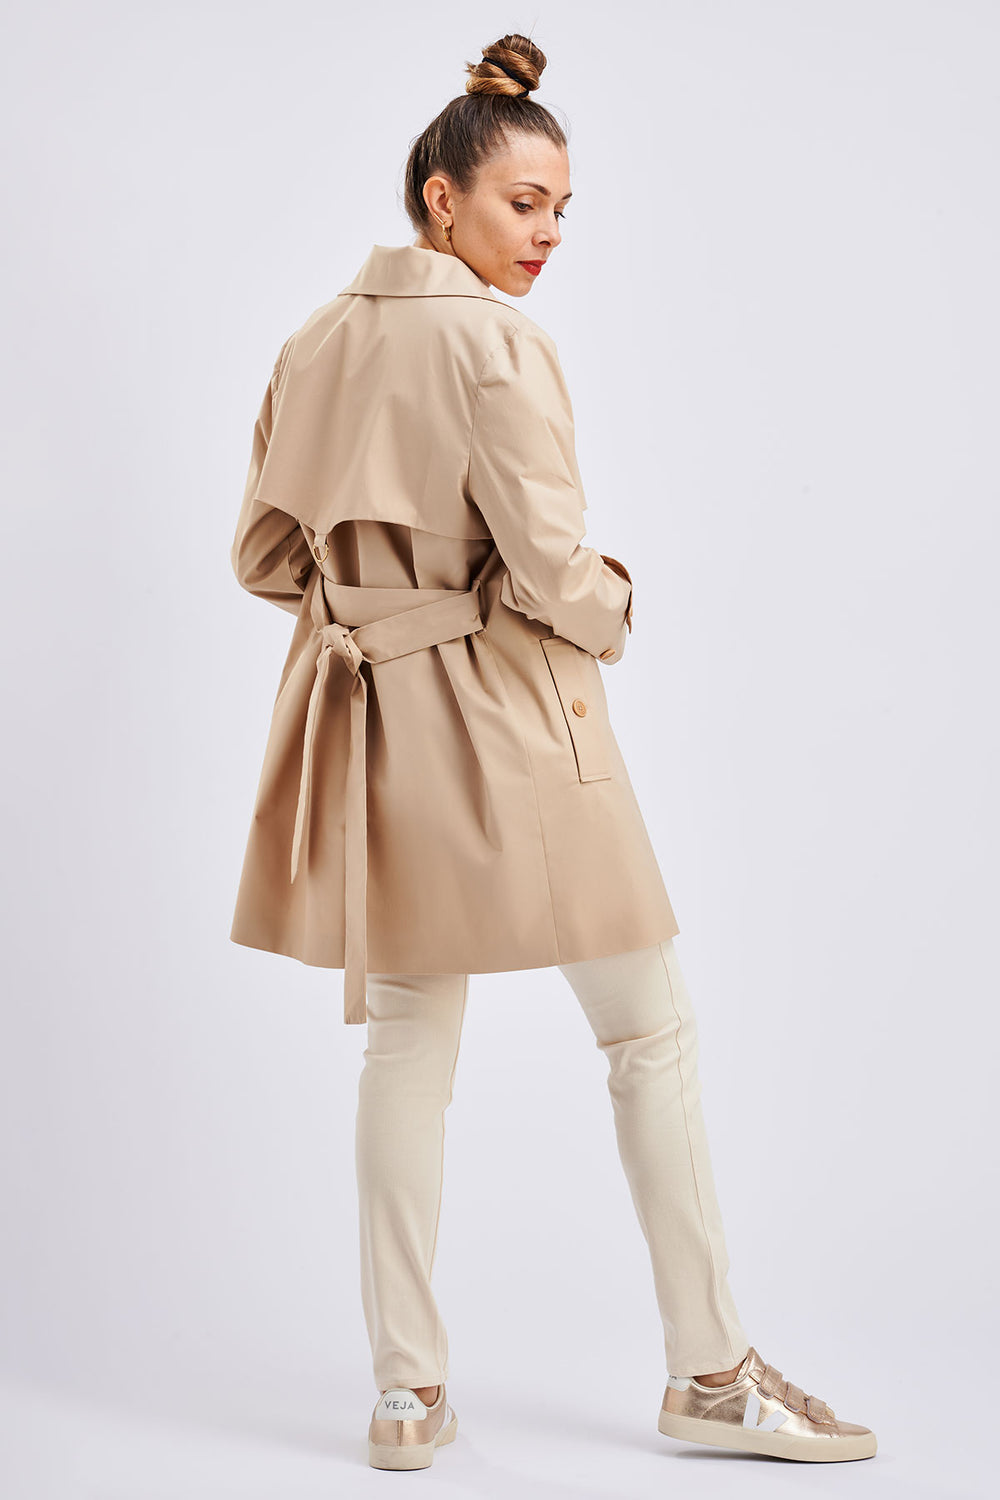 Woman wearing the Bob Trench Coat sewing pattern from I AM Patterns on The Fold Line. A coat pattern made in gabardine, twill, waxed canvas, denim, or lightweight quilted fabrics, featuring a straight cut, mid-thigh length, back storm flap with metal D-ri